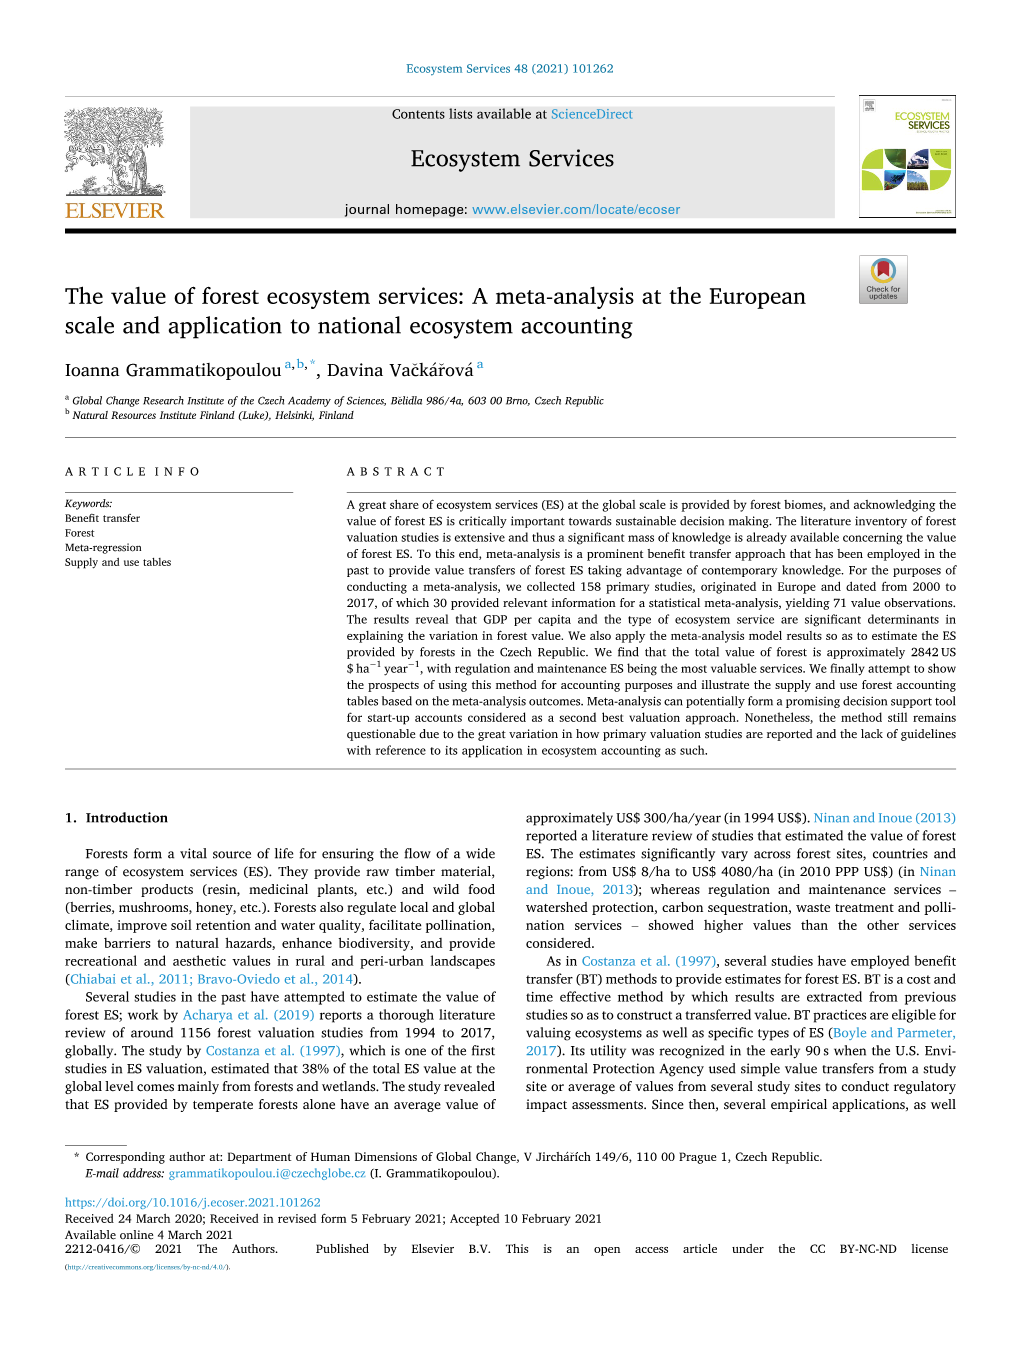 The Value of Forest Ecosystem Services: a Meta-Analysis at the European Scale and Application to National Ecosystem Accounting